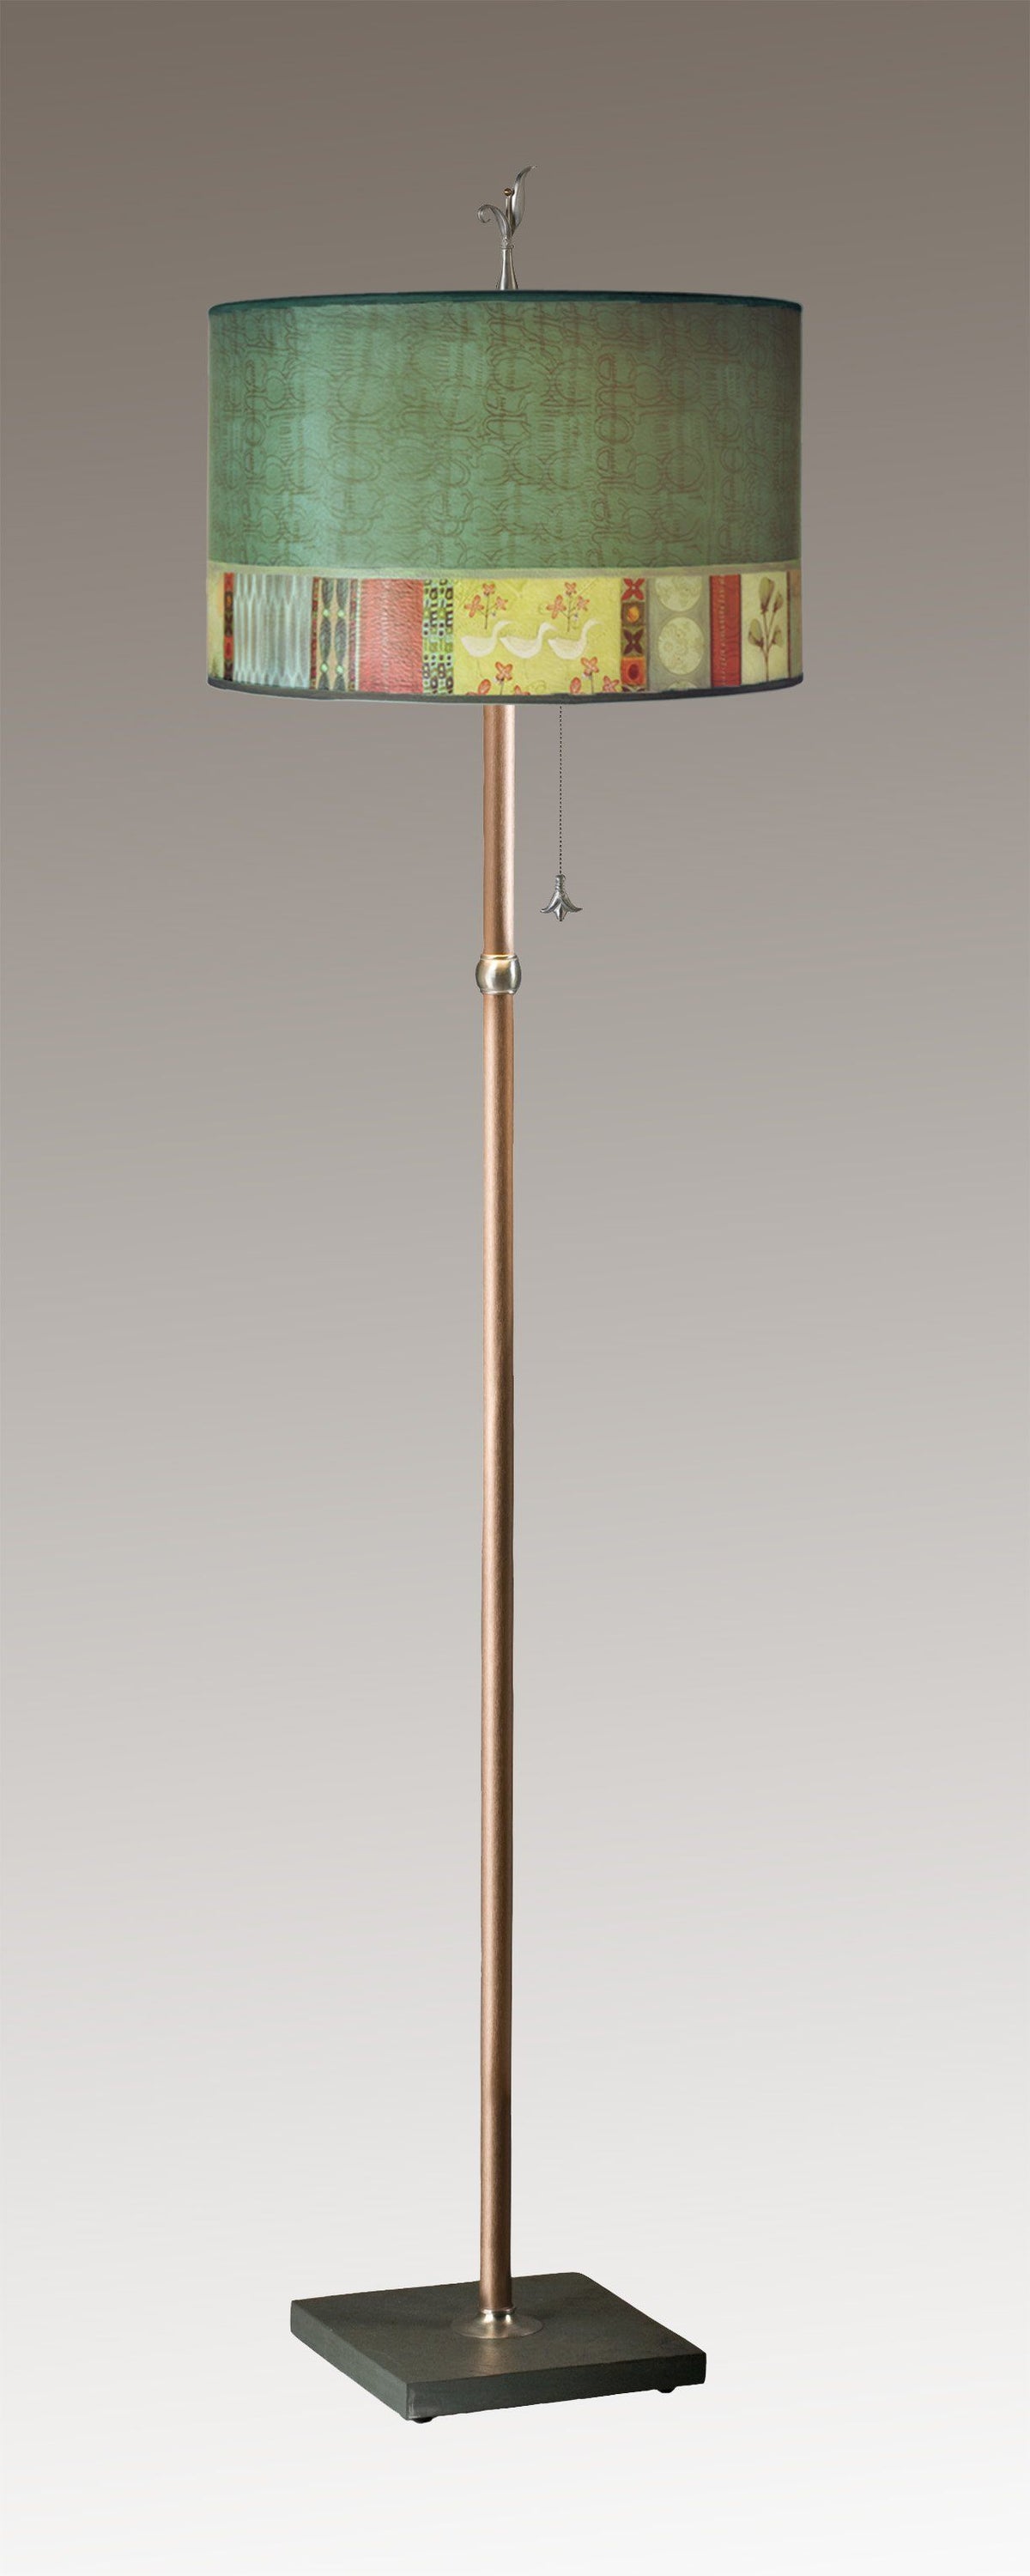 Janna Ugone &amp; Co Floor Lamps Copper Floor Lamp with Large Drum Lampshade in Melody in Jade